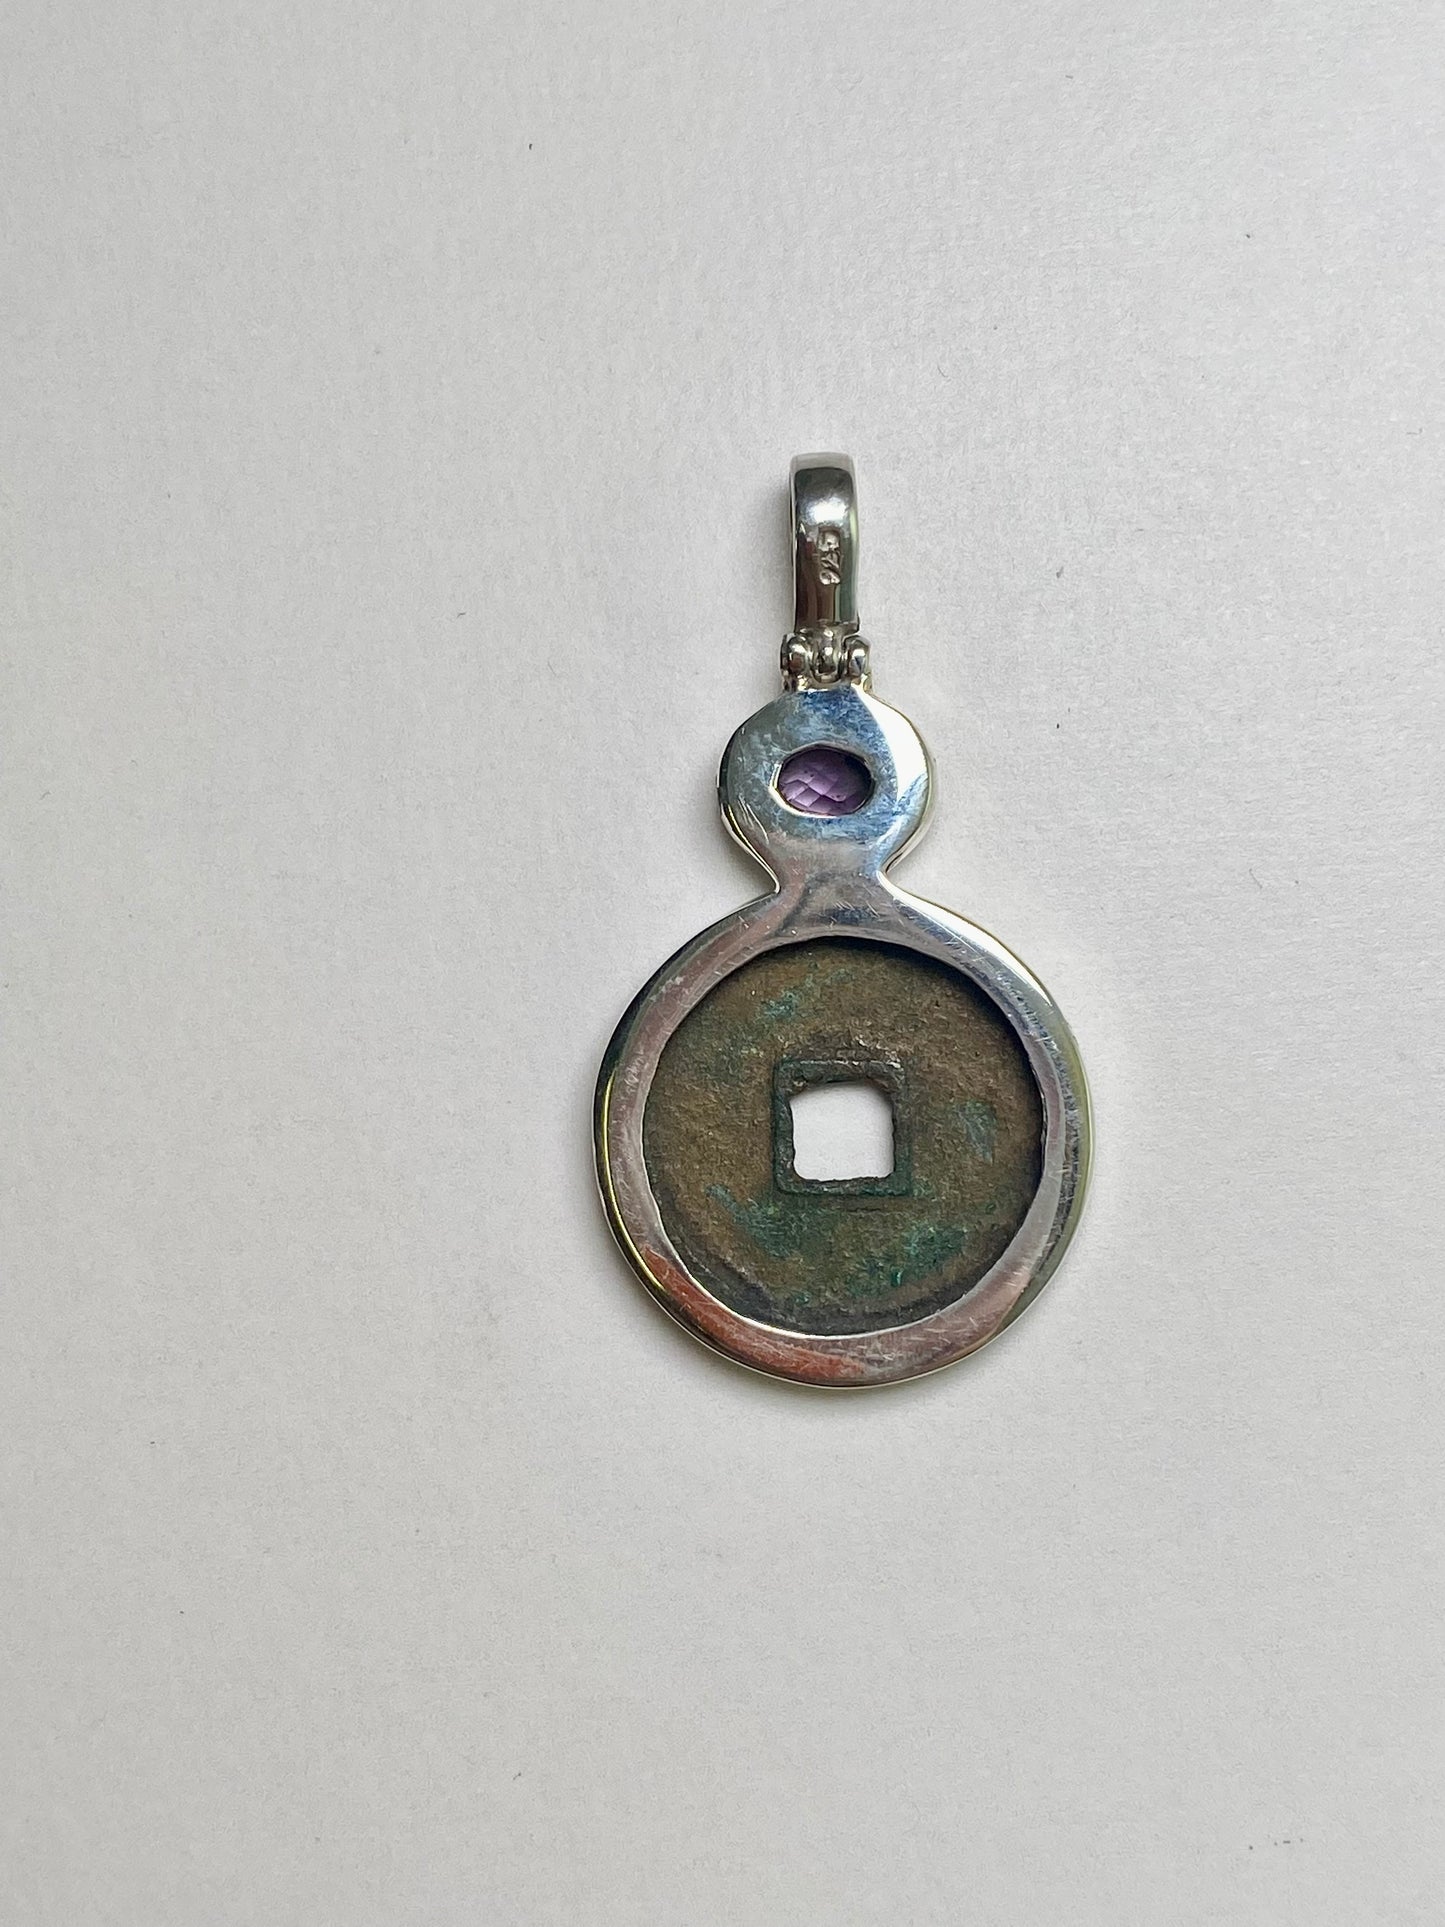 Antique early Ming Yong Le Reign Cash Coin Pendant- Sterling Silver w Amethyst circa 1408-1424